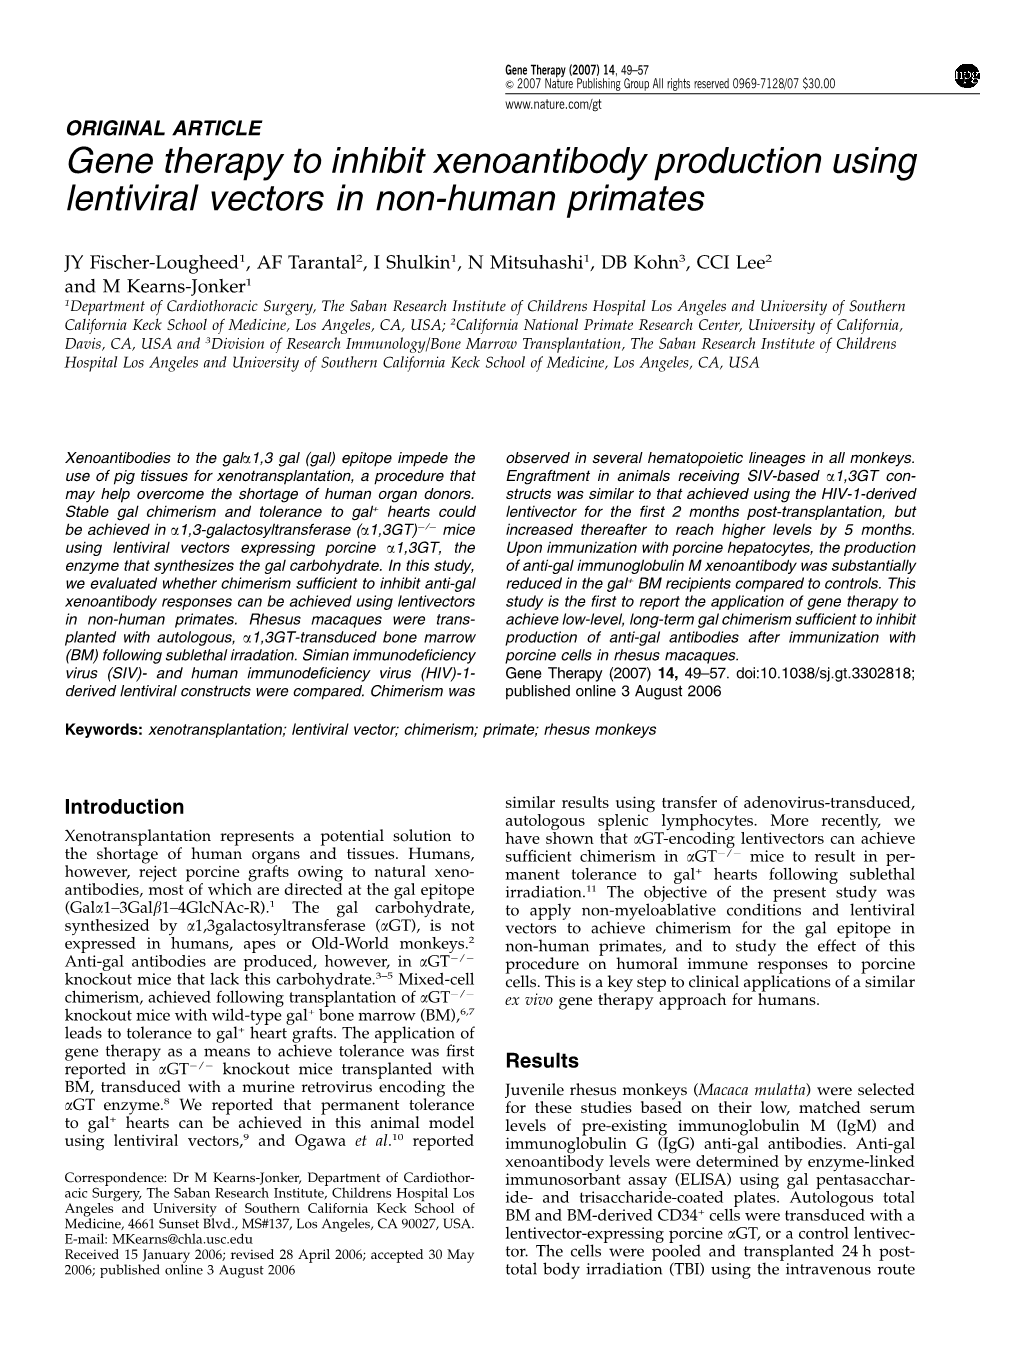 Gene Therapy to Inhibit Xenoantibody Production Using Lentiviral Vectors in Non-Human Primates